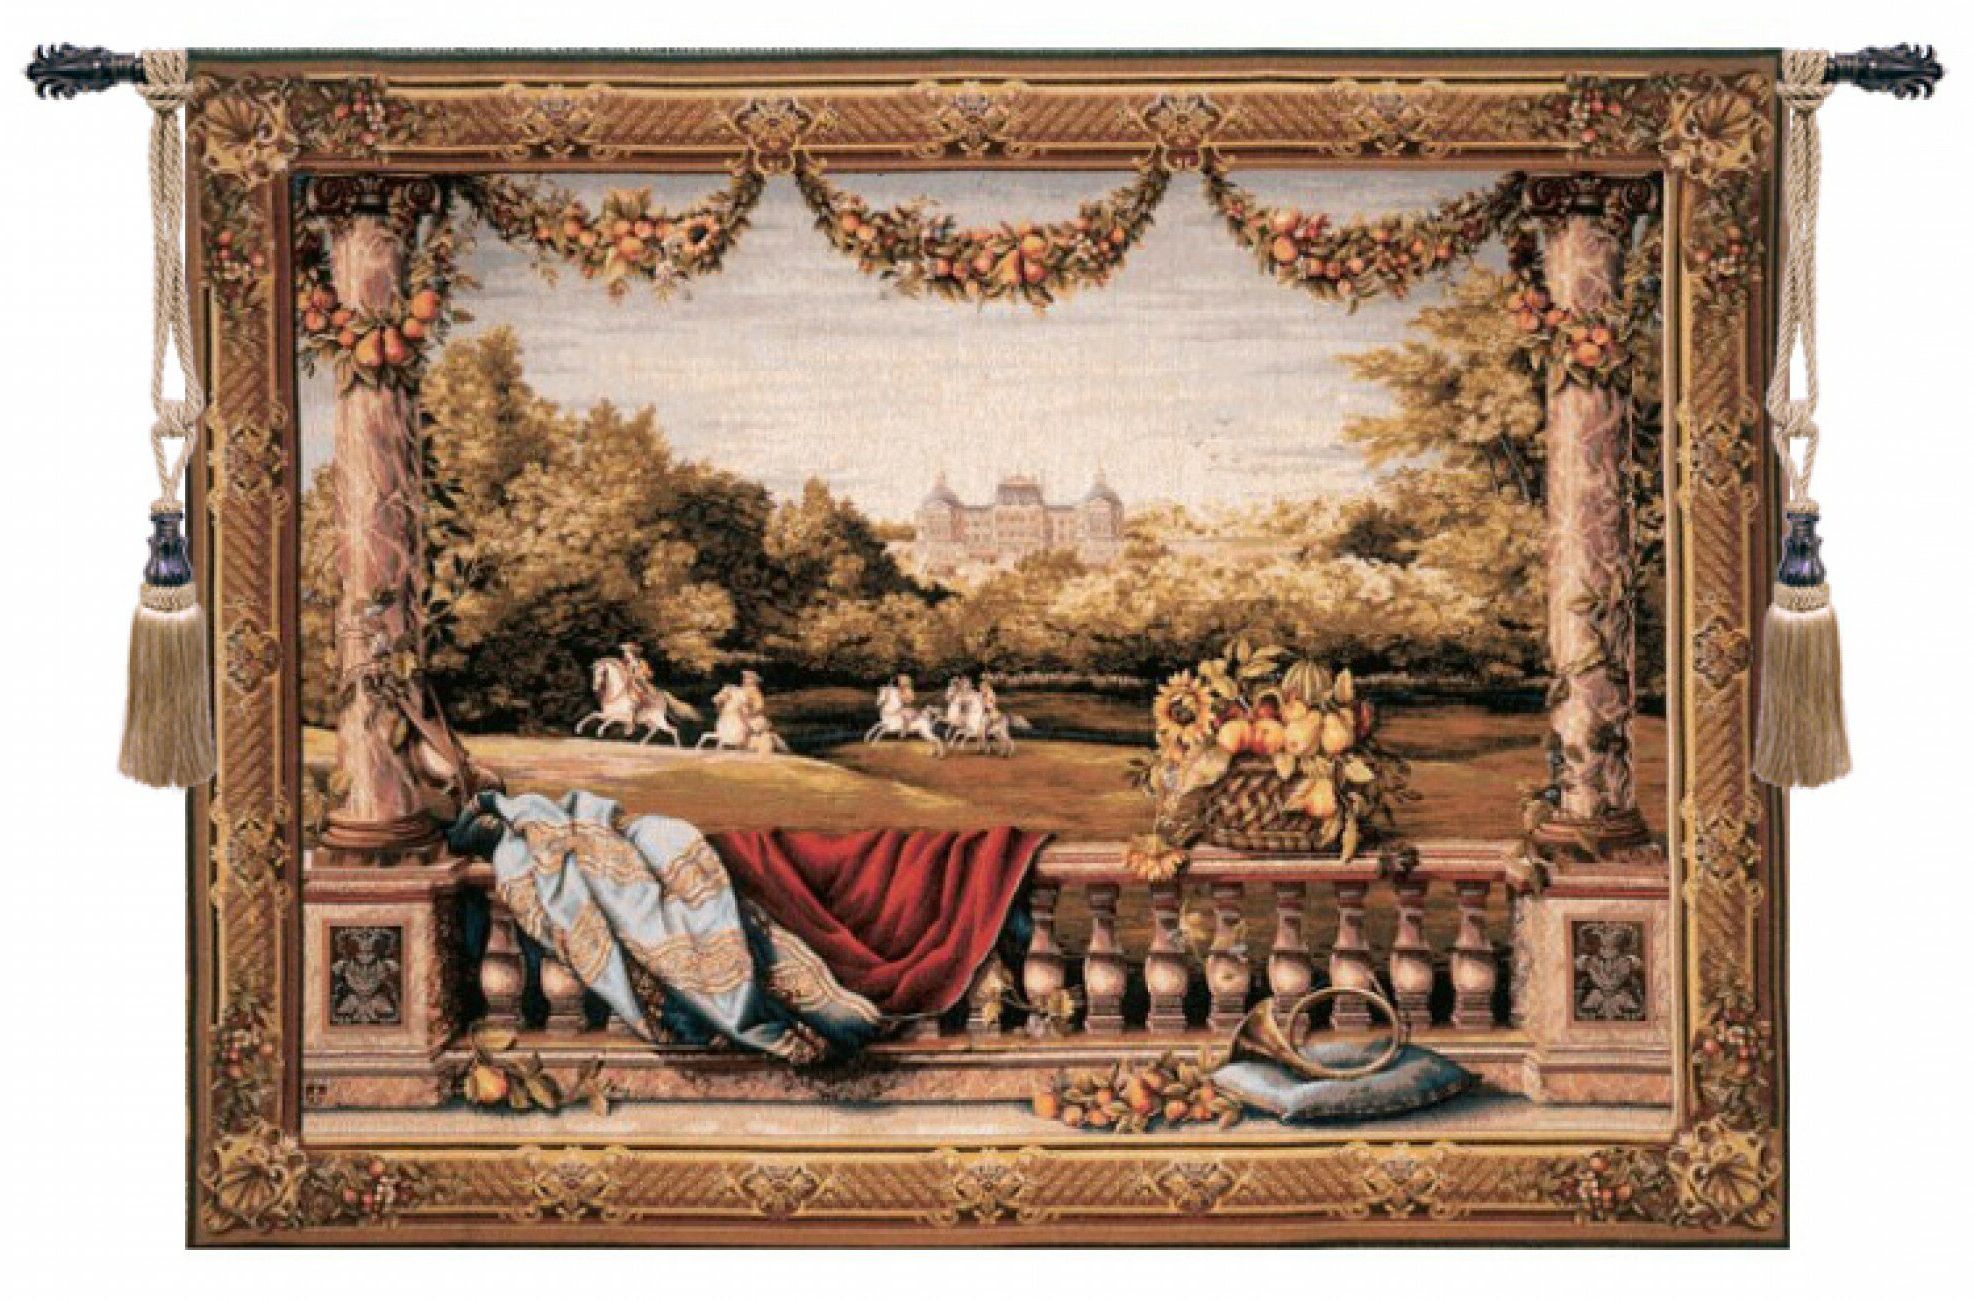 Most Recently Released Chateau Bellevue European Tapestry Throughout Blended Fabric Chateau Bellevue European Tapestries (View 1 of 20)